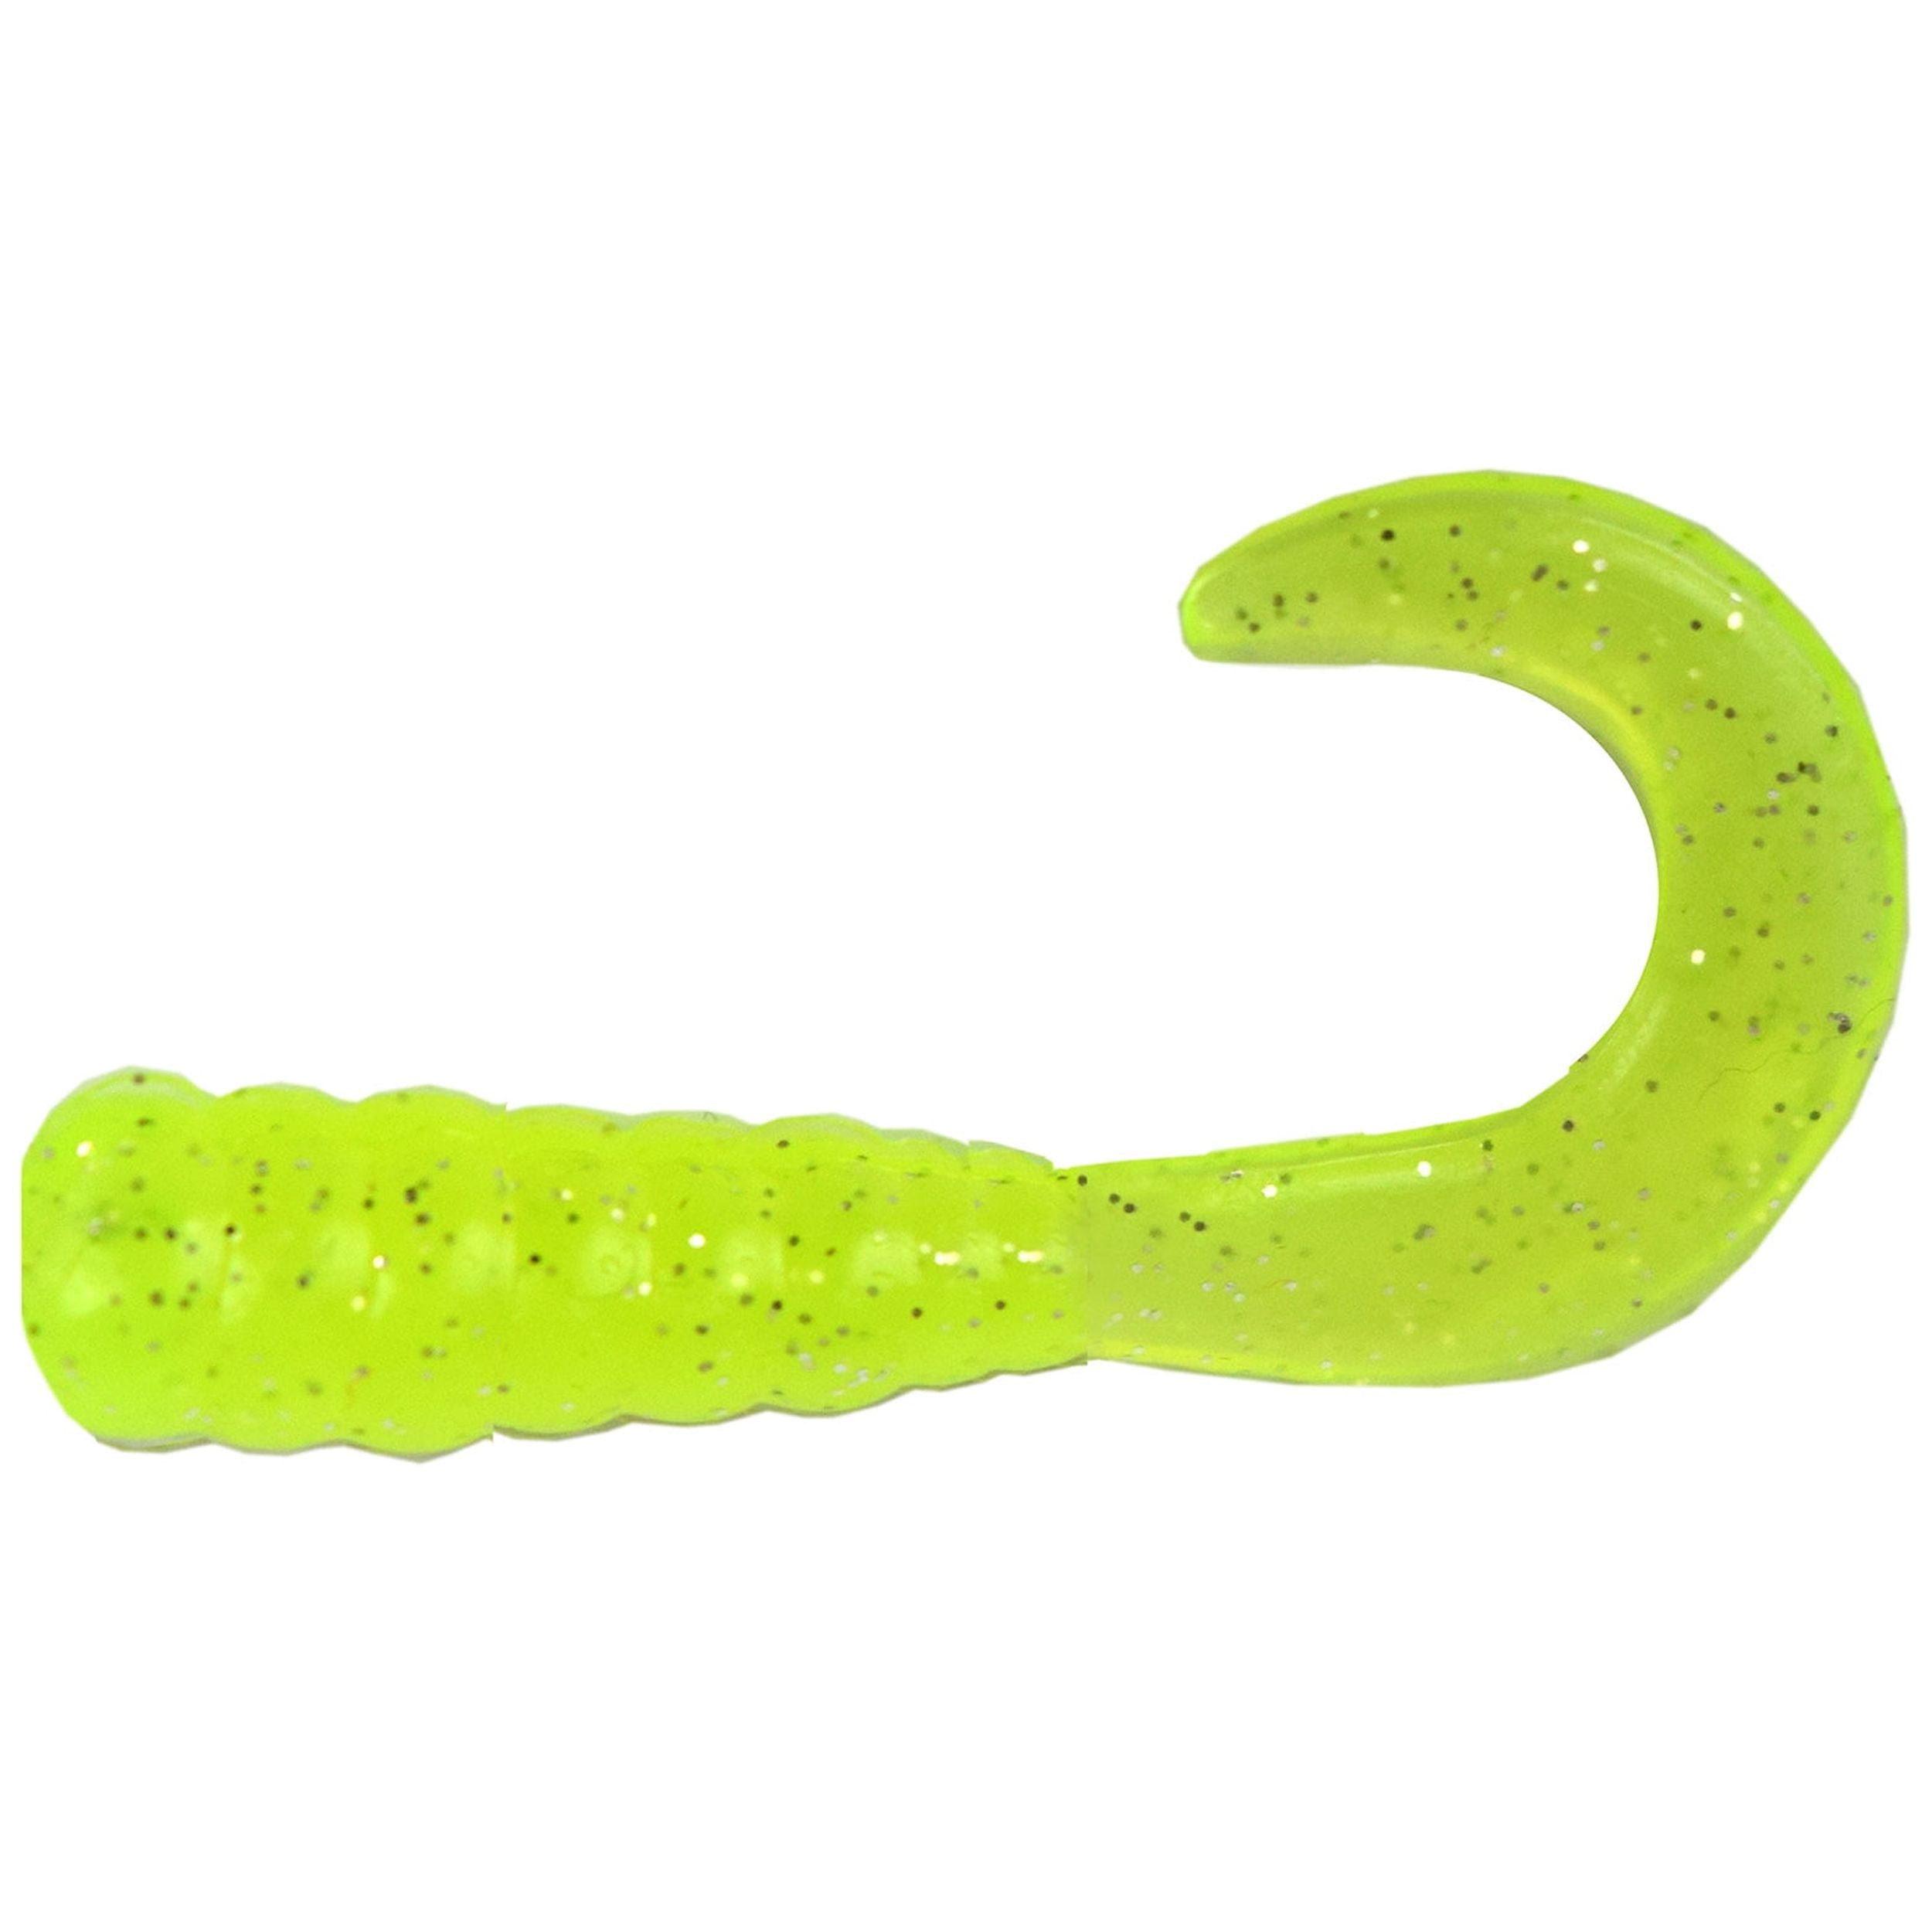 Tackle HD 40-Pack Grub Fishing Lures, 2-Inch Skirted Grub with